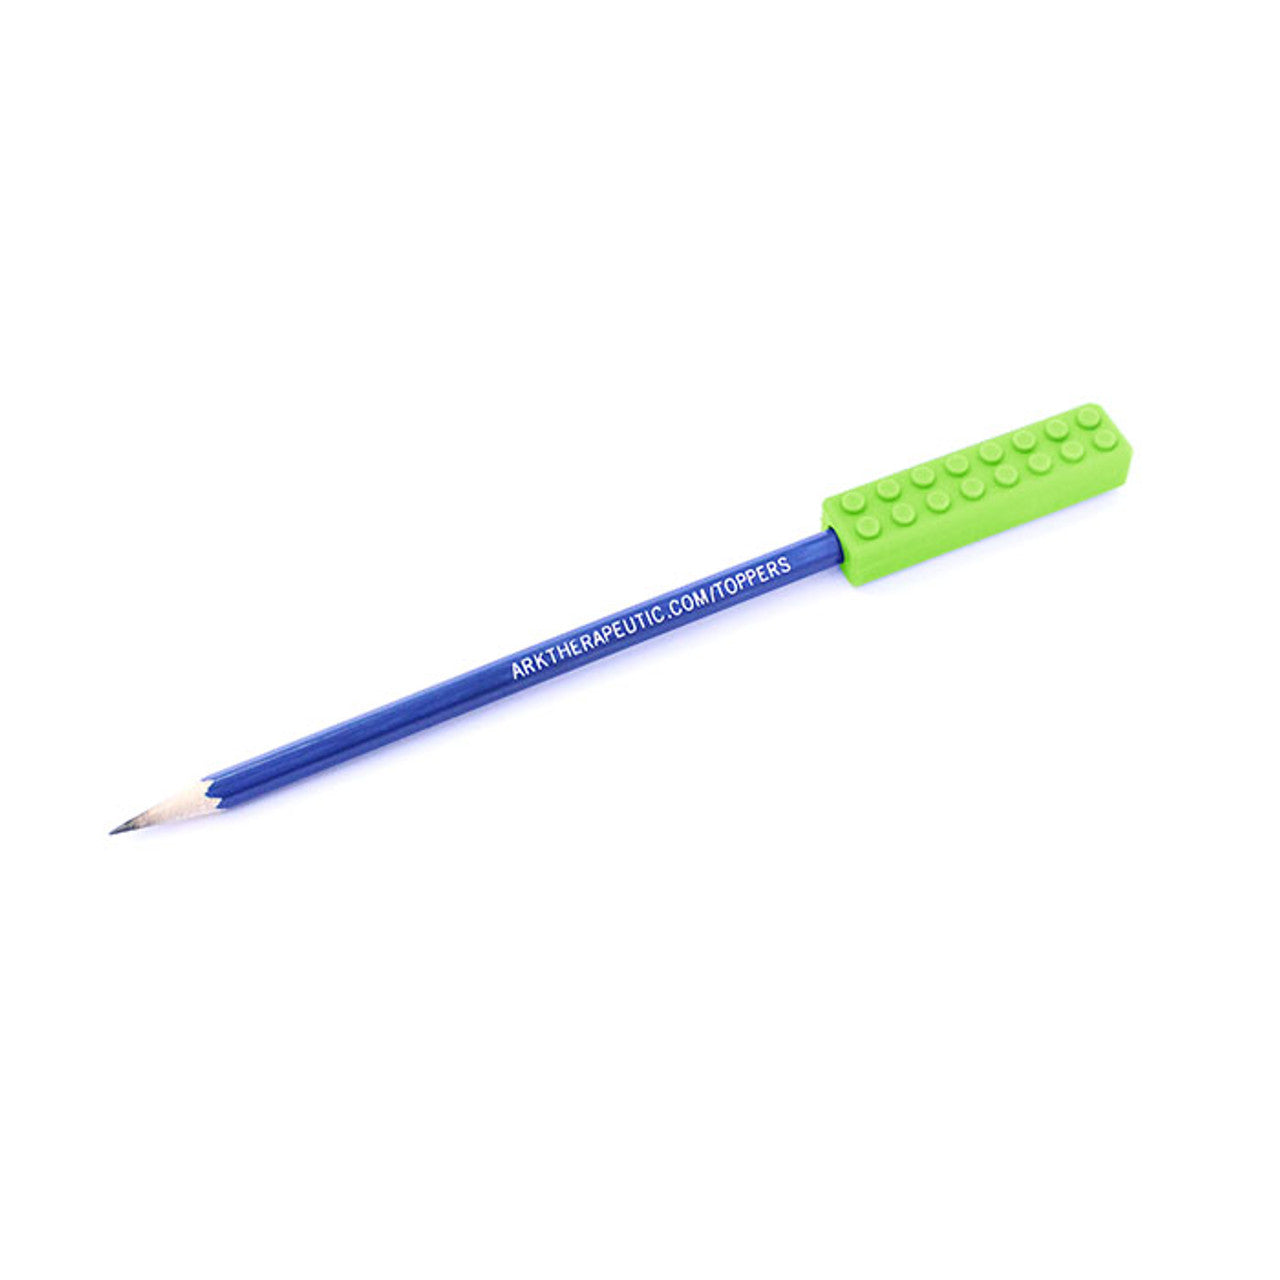 Ark_Brick_stick_pencil_toppers_Lime_Green